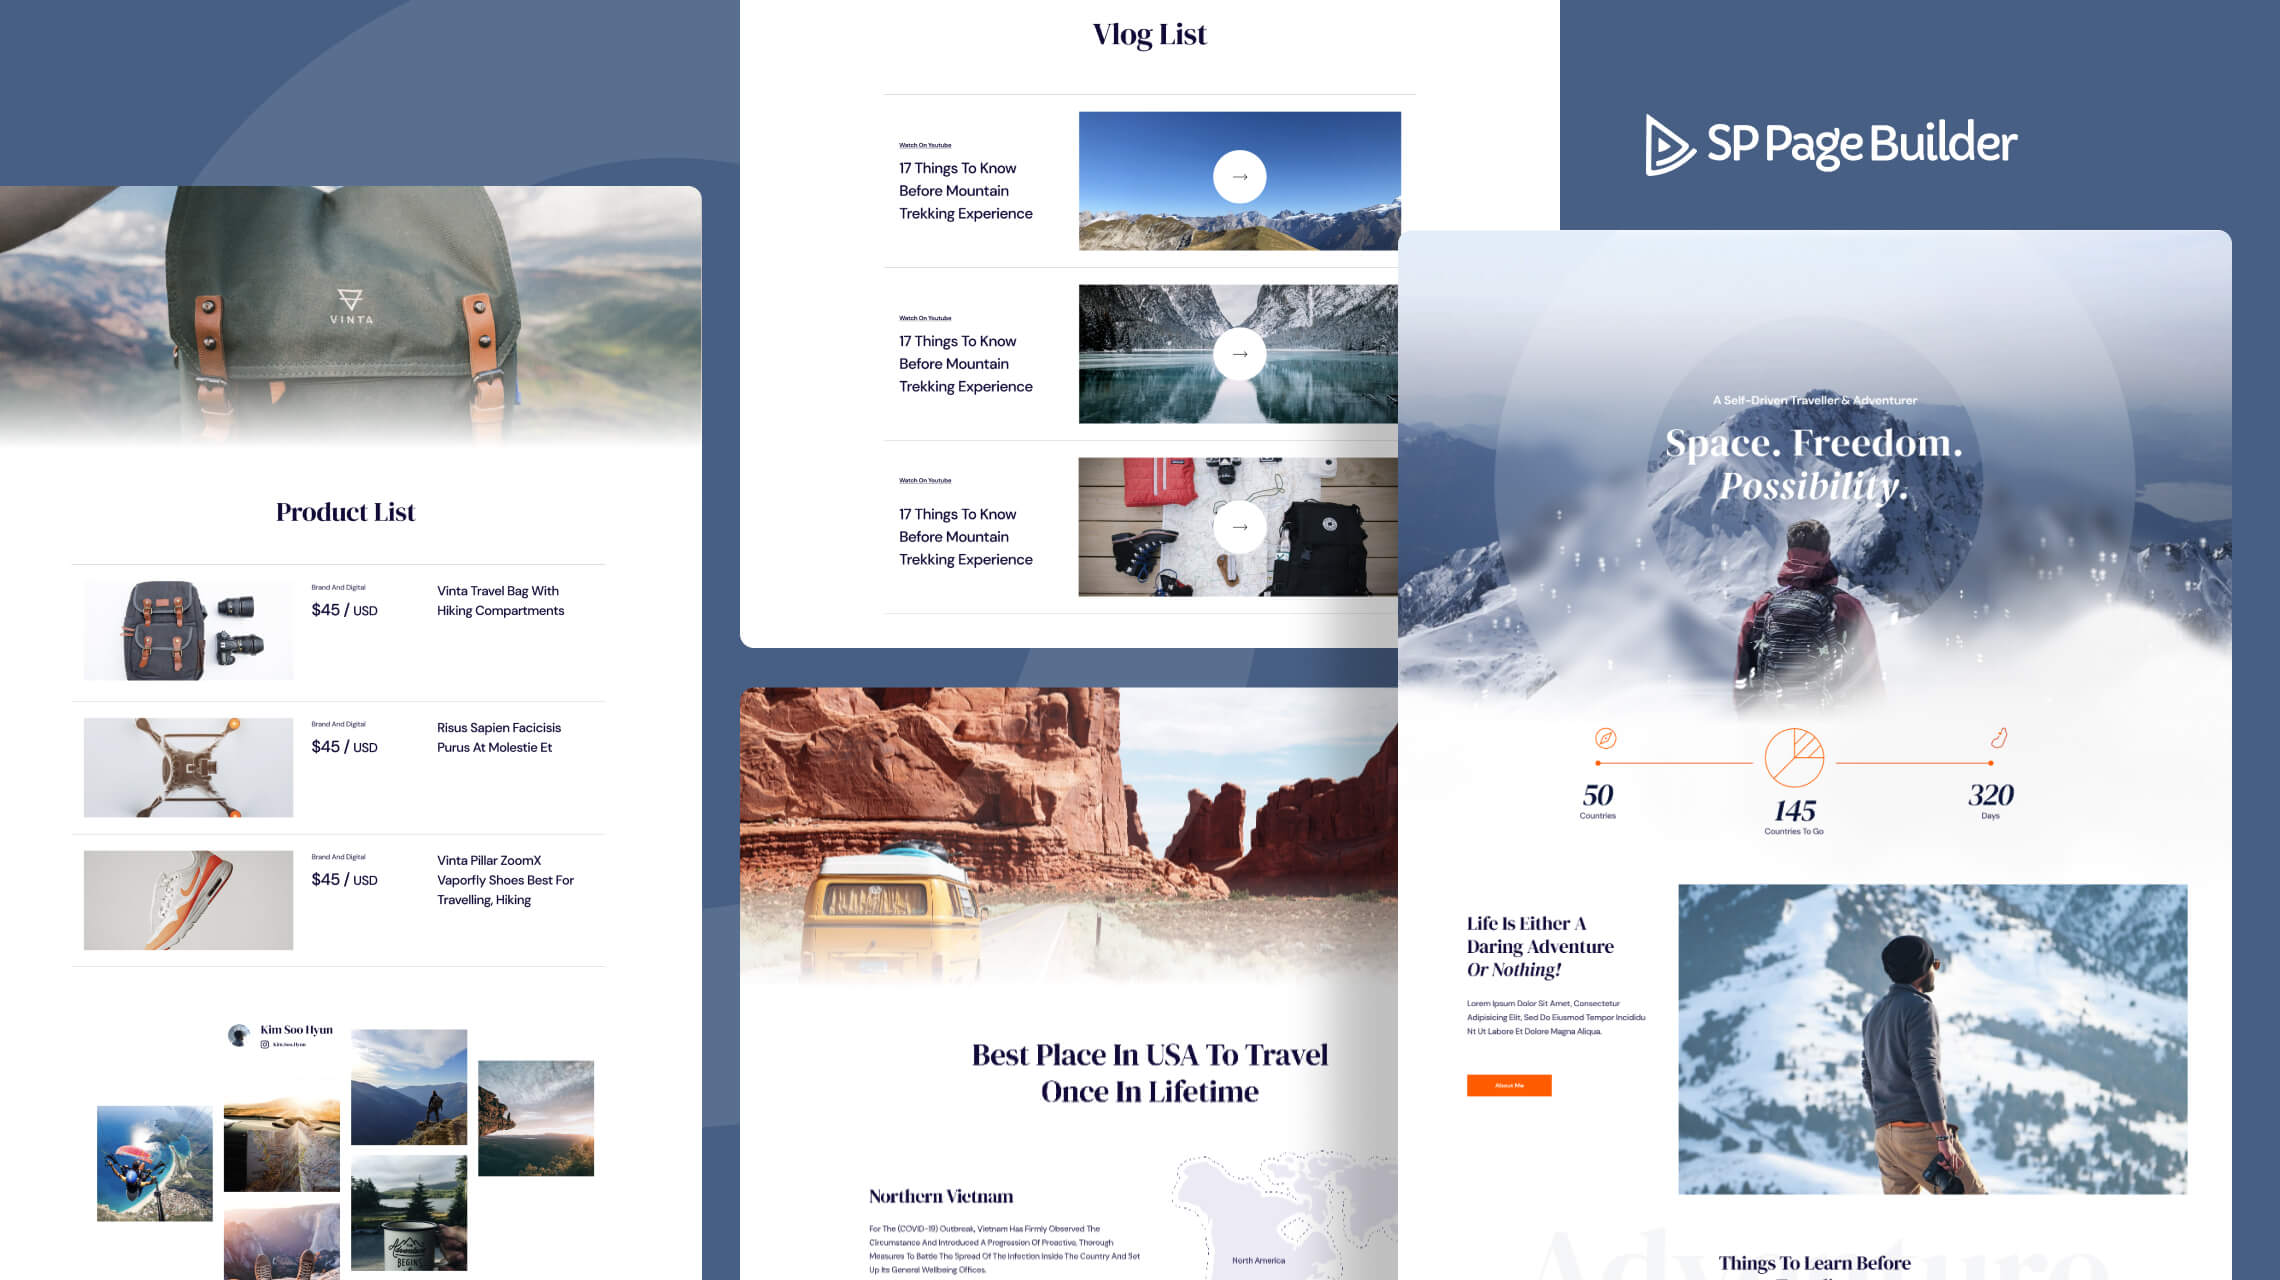 Introducing Wanderlust - A Free Layout Bundle for SP Page Builder Pro